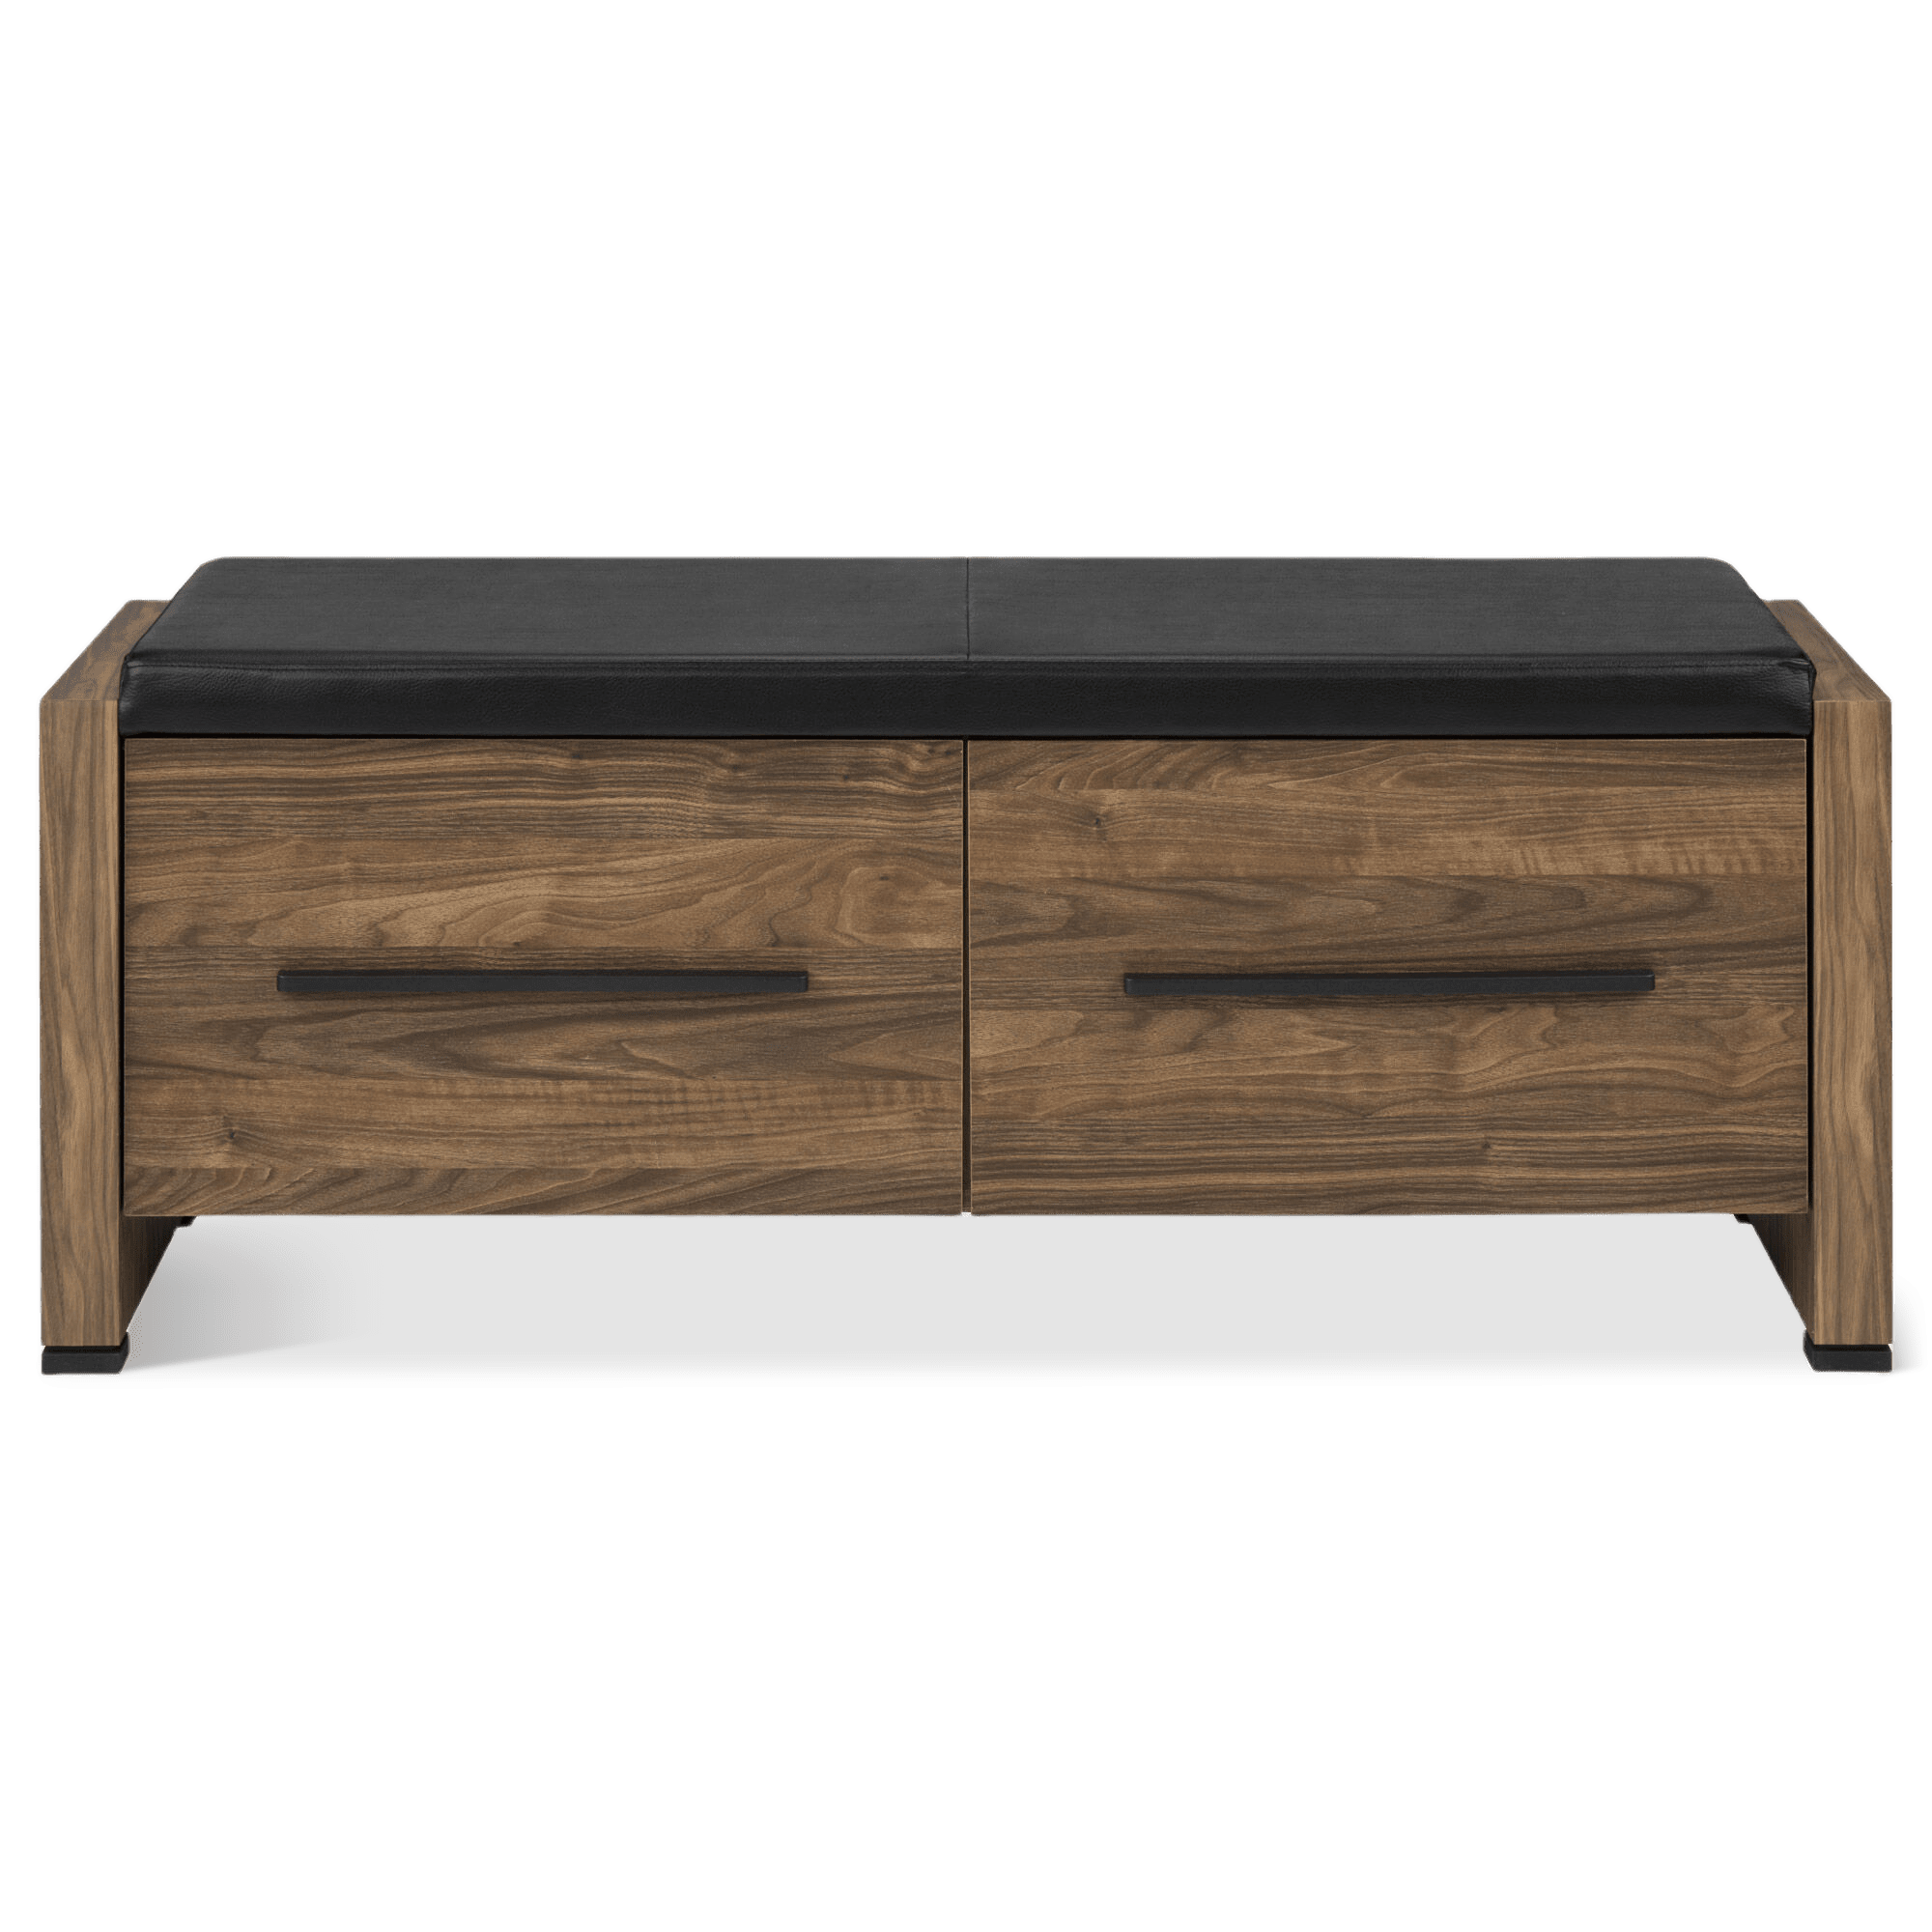 Faux Leather and Wood Storage Bench